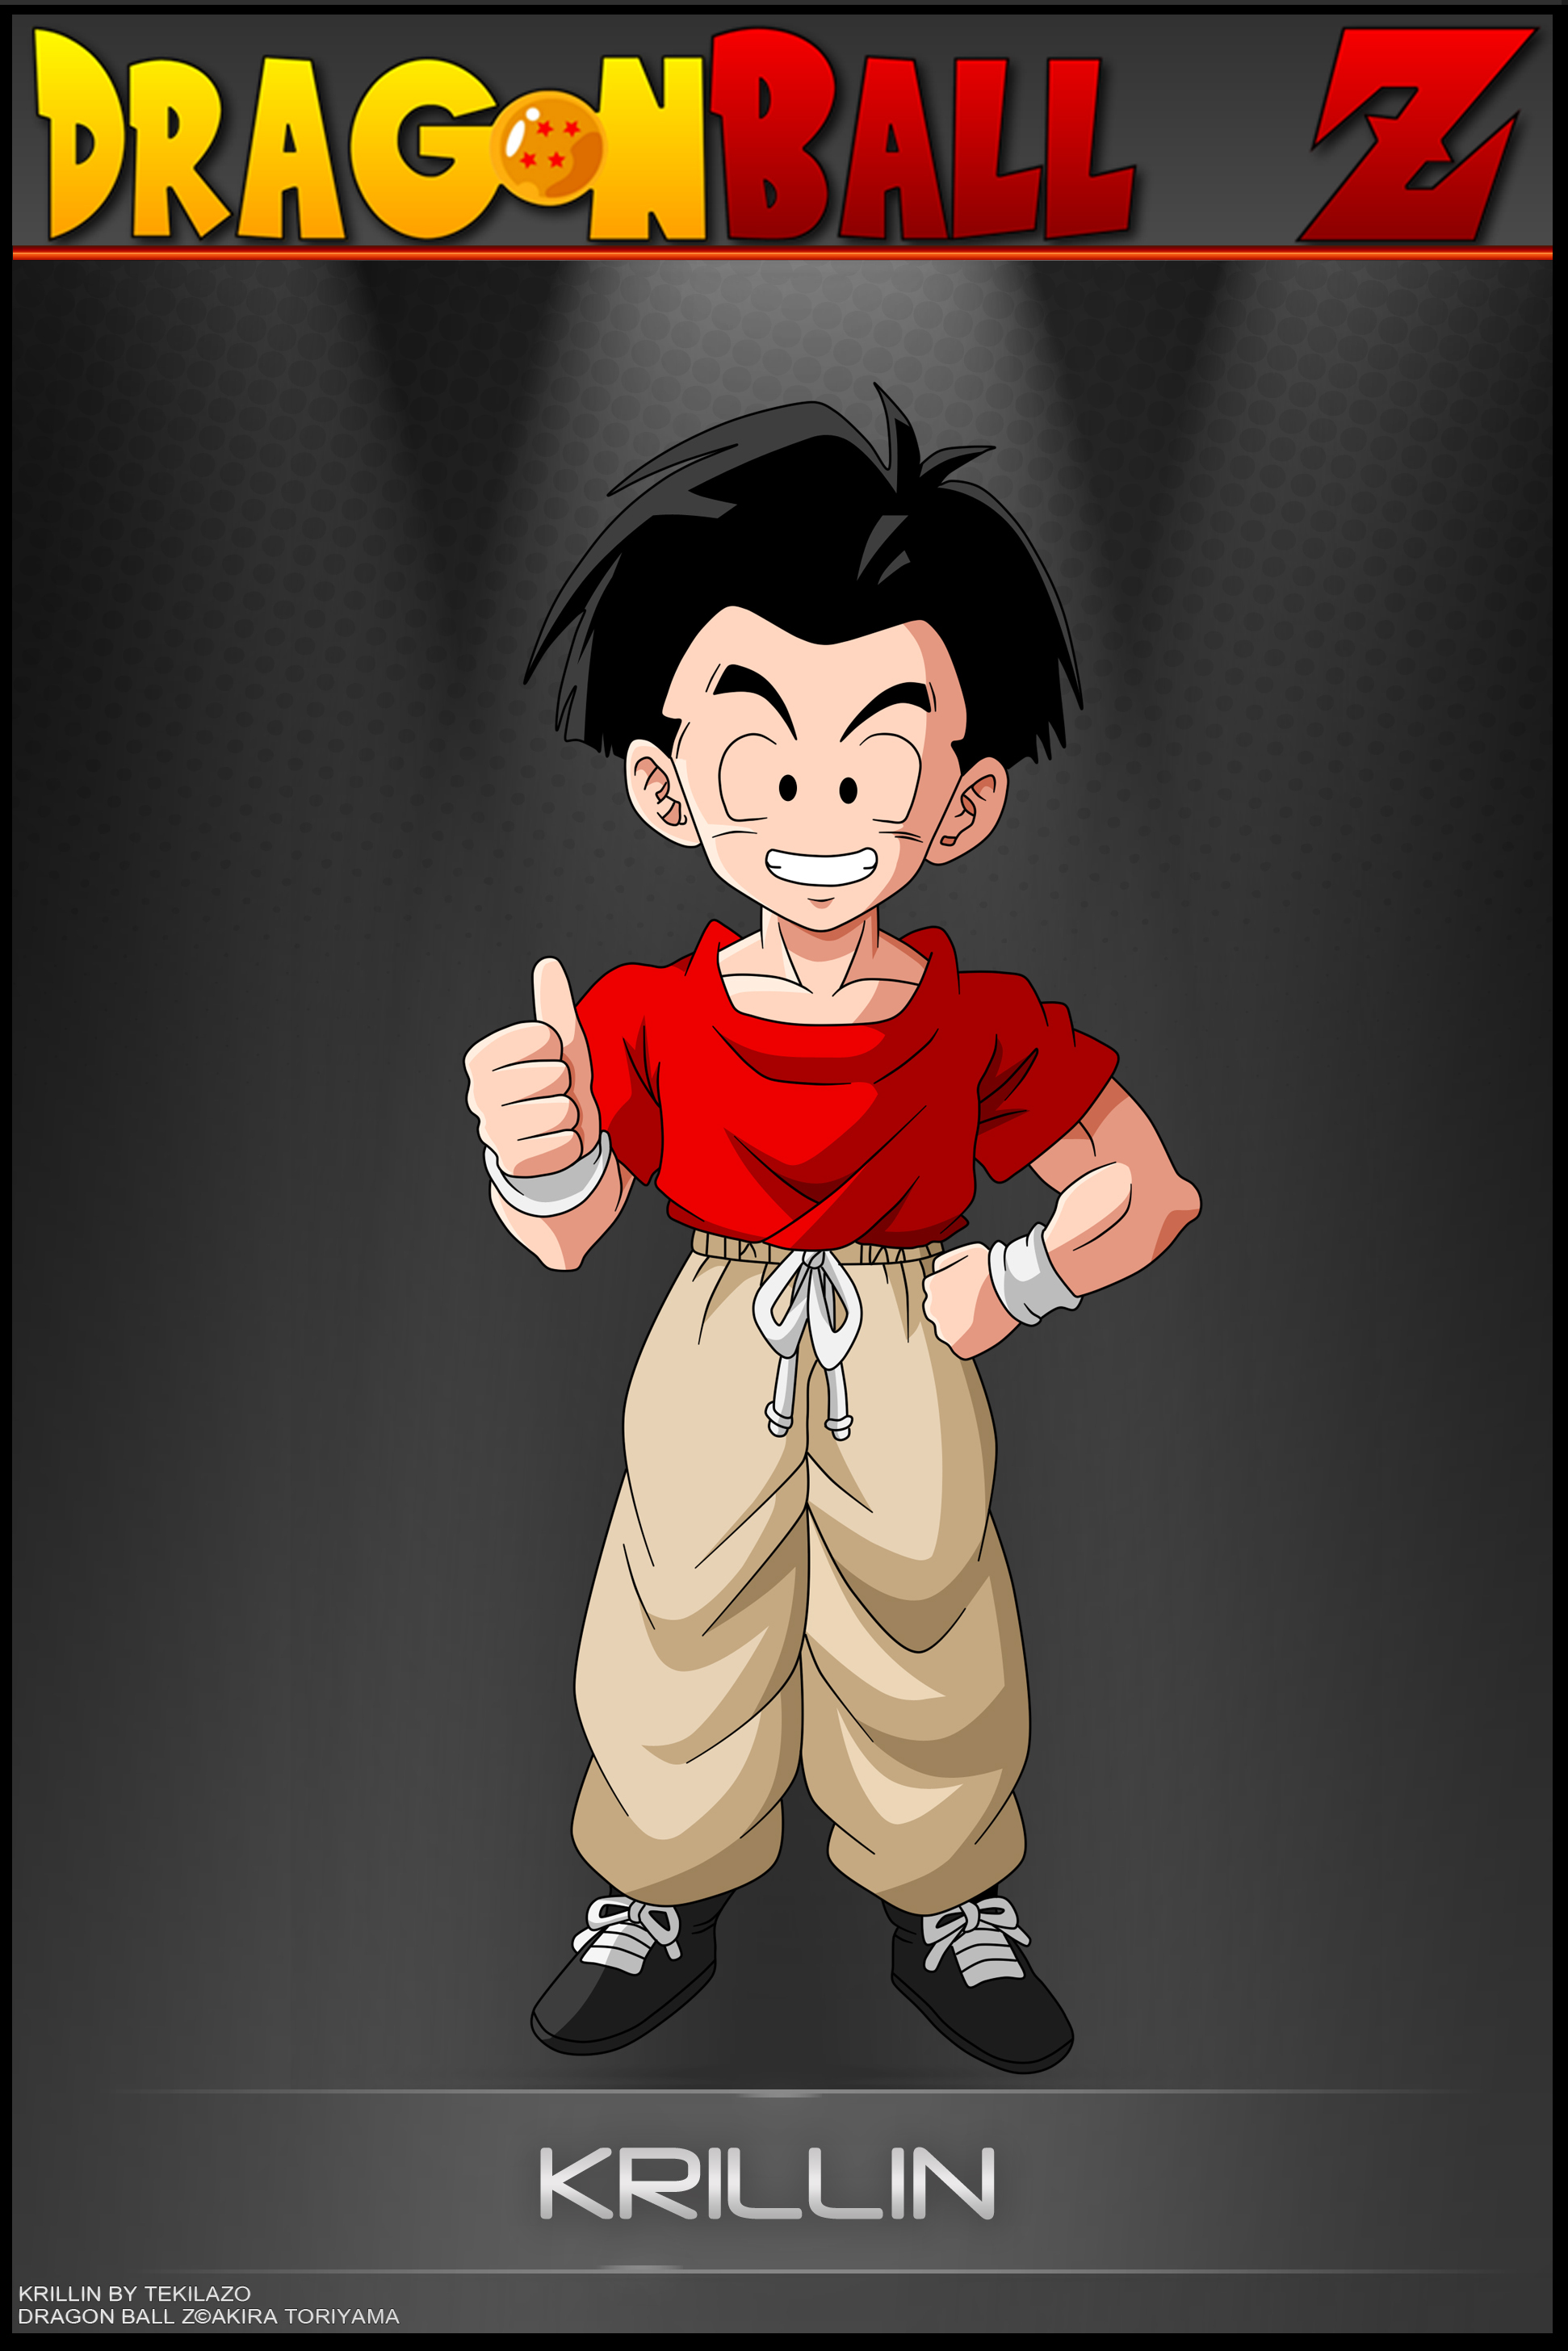 Dragon Ball Z. Which one Krillin you like more with hair or bald? 